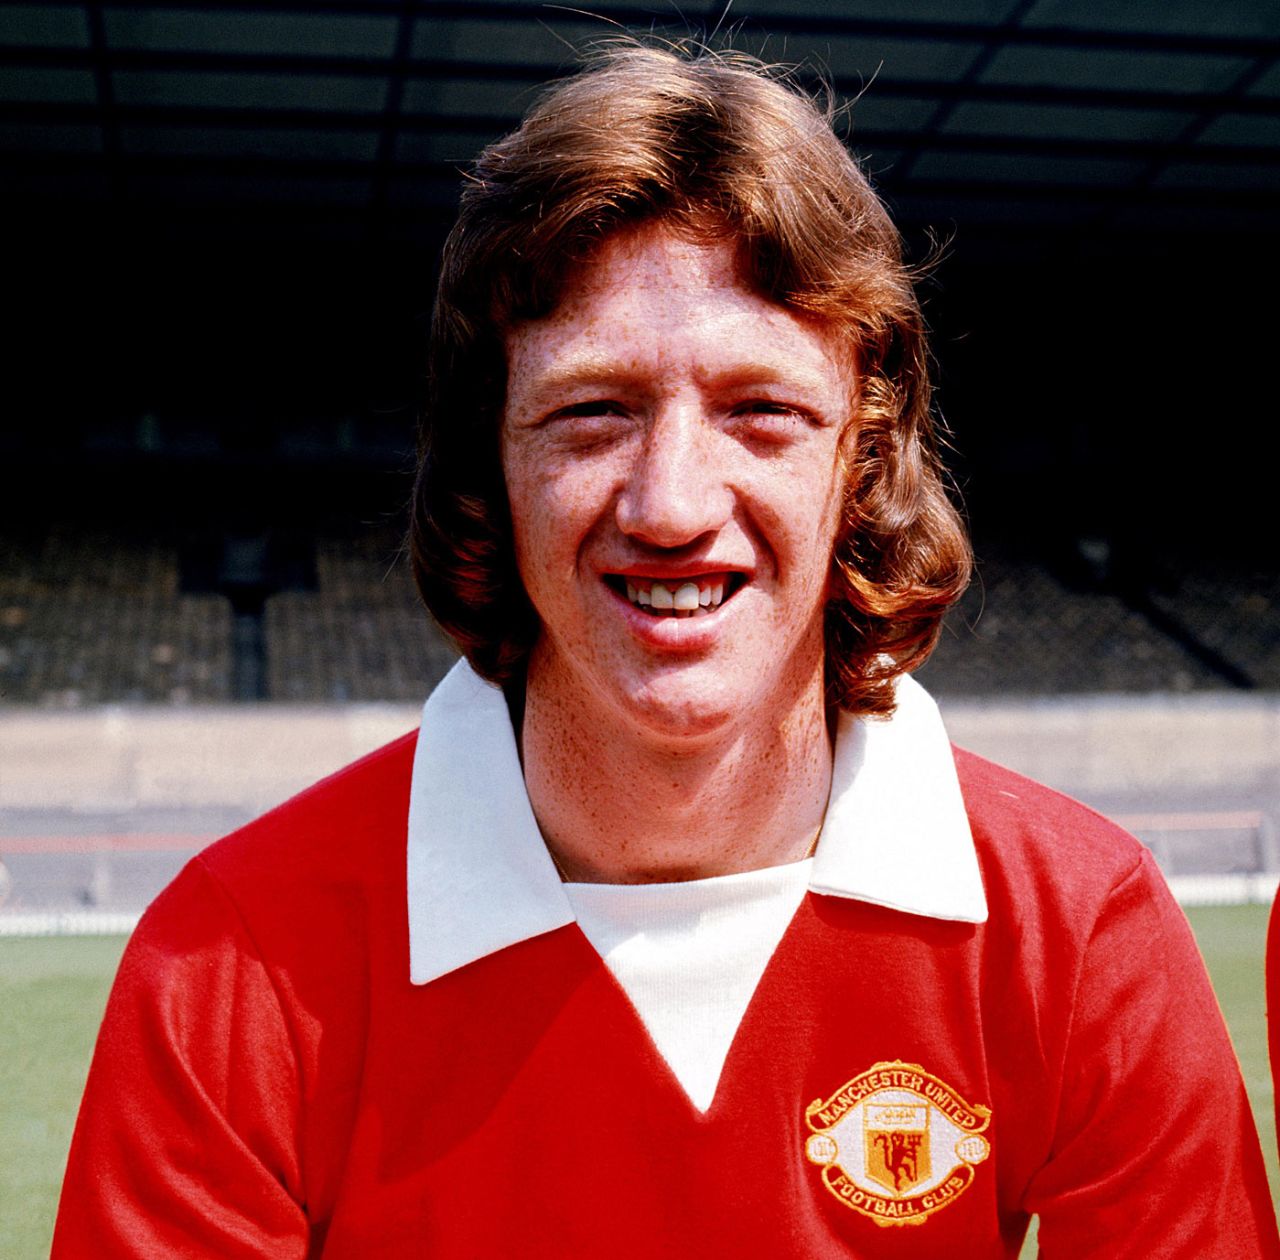 Arnie Sidebottom with Manchester United, England, August 1973